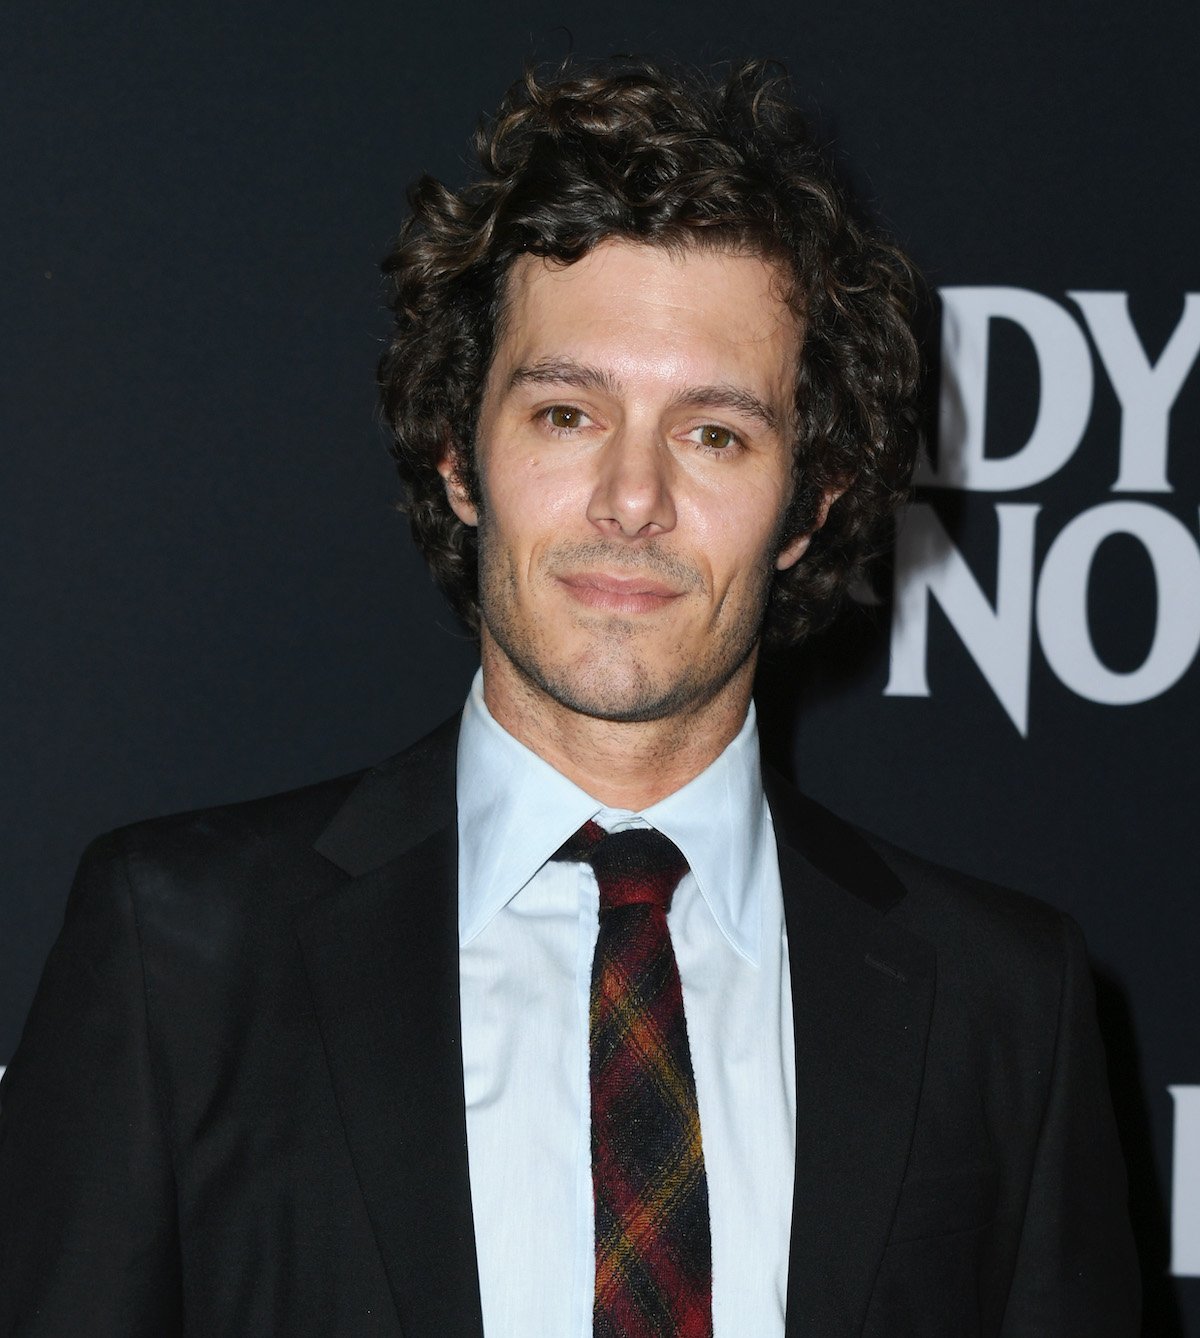 Adam Brody smiles for the camera at an event.